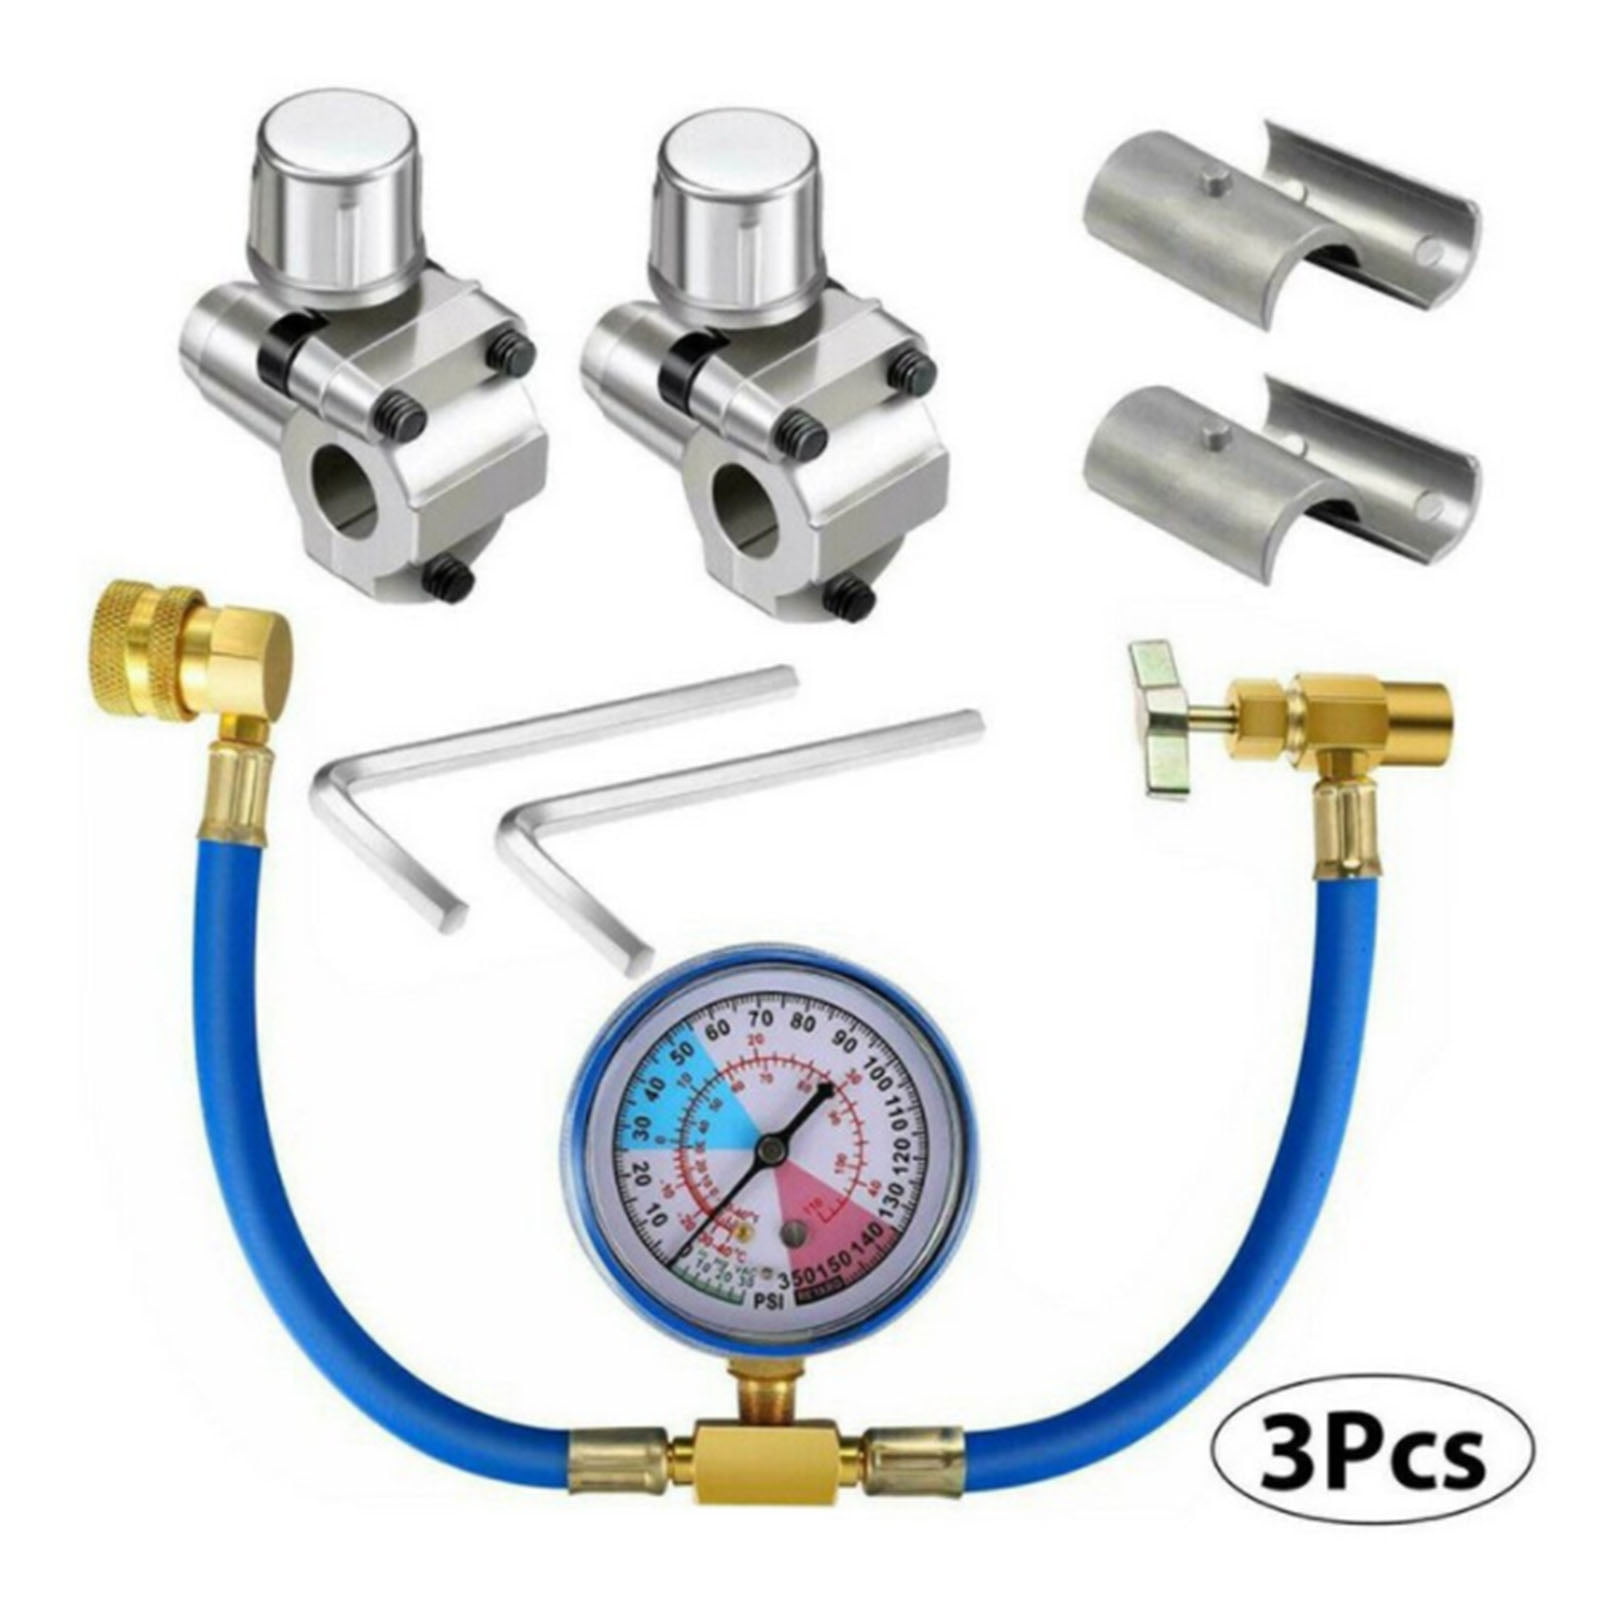 Connect to R12/ R22 Port Only 5/16 2 Pack BPV31 Bullet Piercing Tap Valve Kits Compatible with 1/4 3/8 Inch Outer Diameter Pipes and R134A Air Conditioning Refrigerant Charging Hose with Gauge 